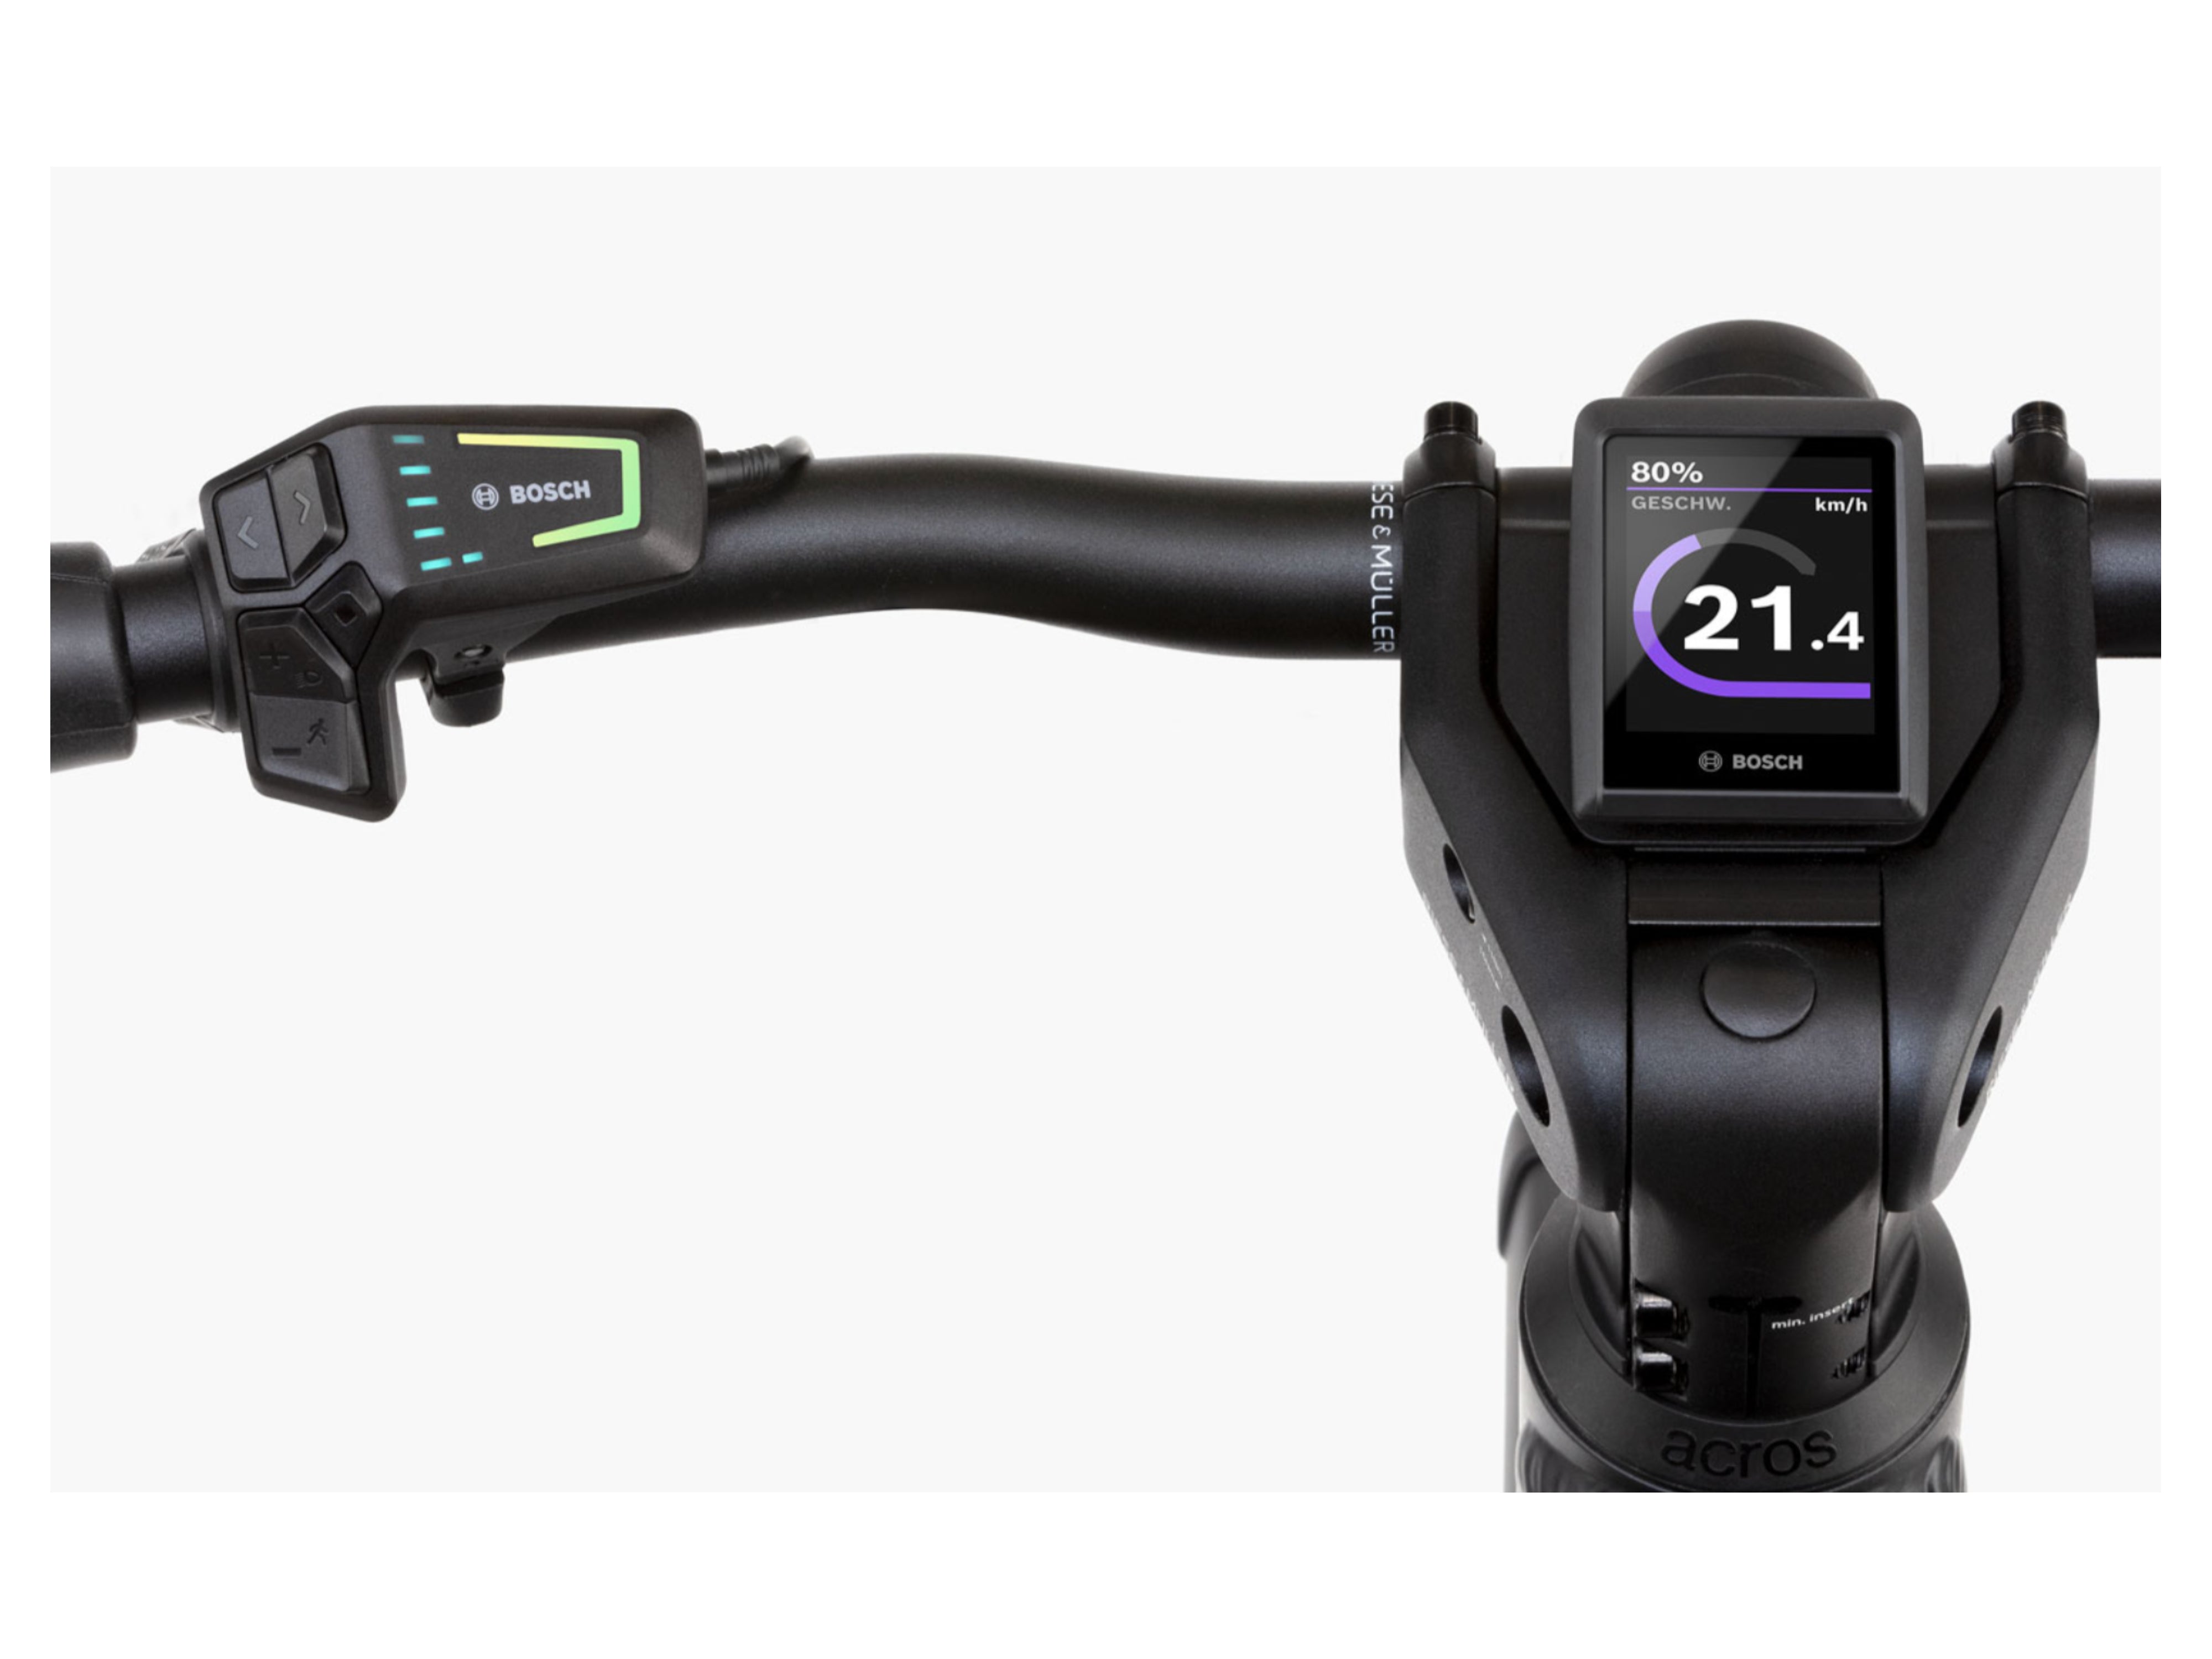 Riese & Muller Charger4 GT Vario